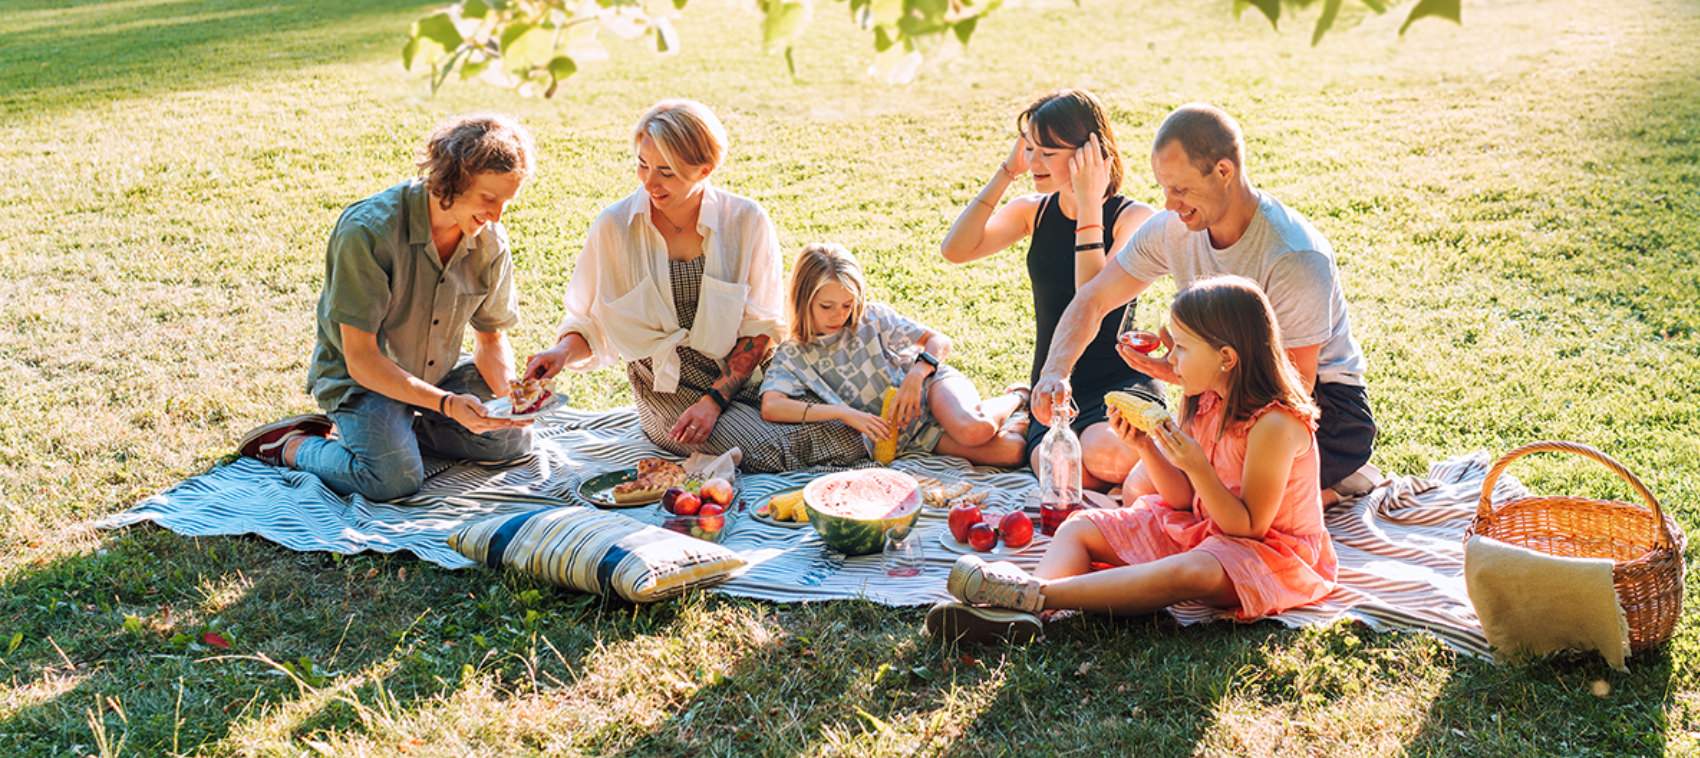 Image of people enjoying a picnic in the park